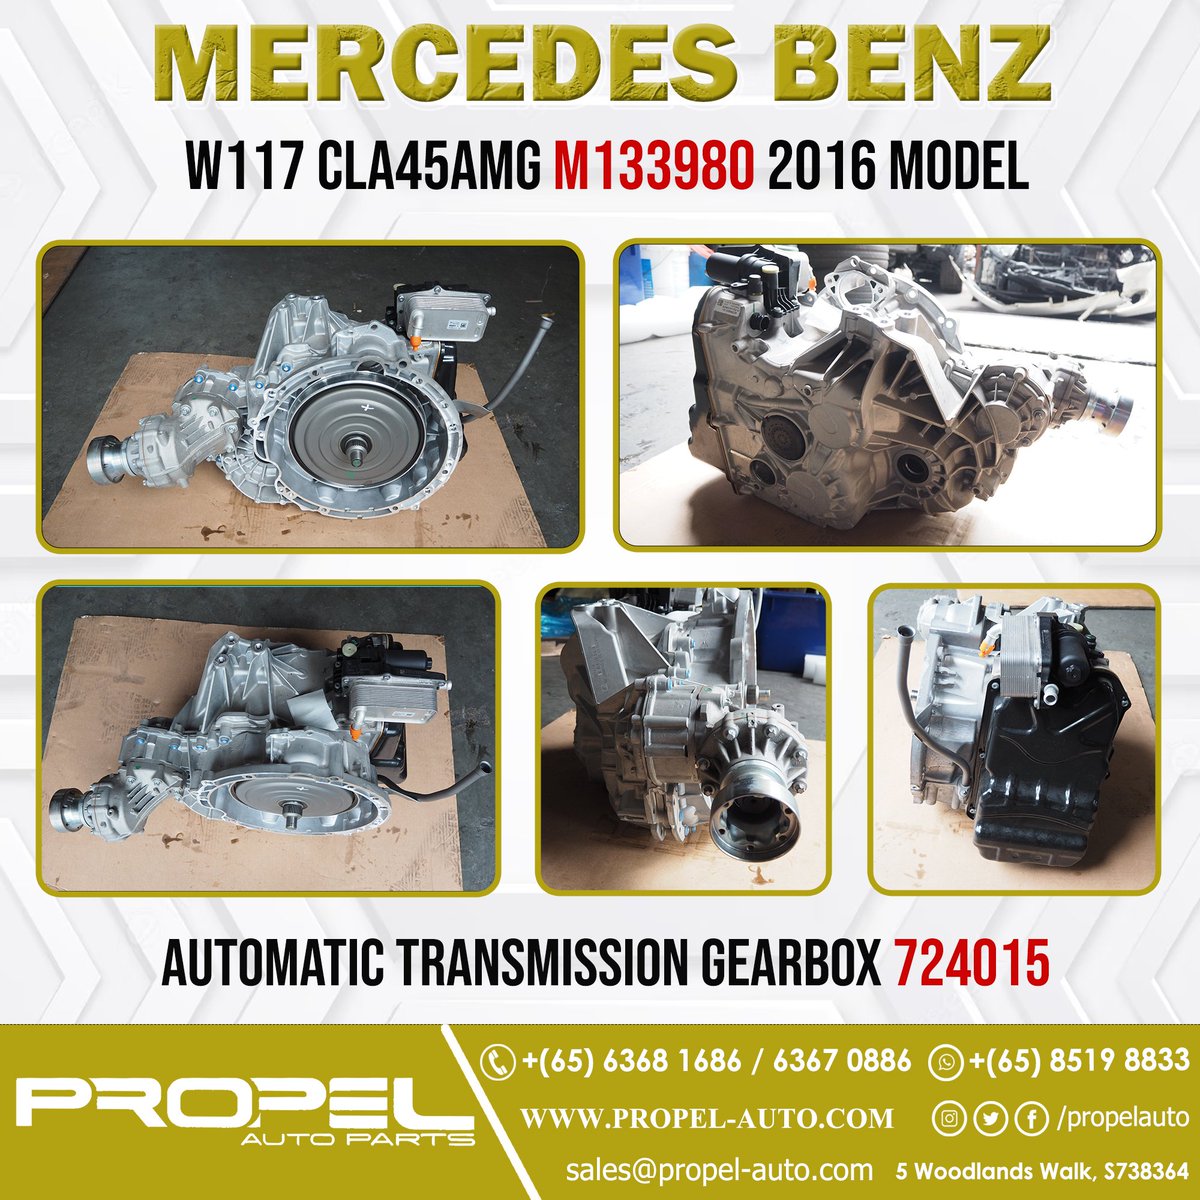 Mercedes W117 CLA45AMG 724015 Auto Transmission Gearbox #CNYSale

Ping us & Grab the Test Drive Car Gear for your ride🤗🚘🚕

#M133980 #AMGGearbox #W117 #CLA45AMG #AMG #Gear #Transmission #724015Gear #CompleteSet #SGCar #PropelAutoParts #eBay #OnlineStore #LowestMileage #66KMonly